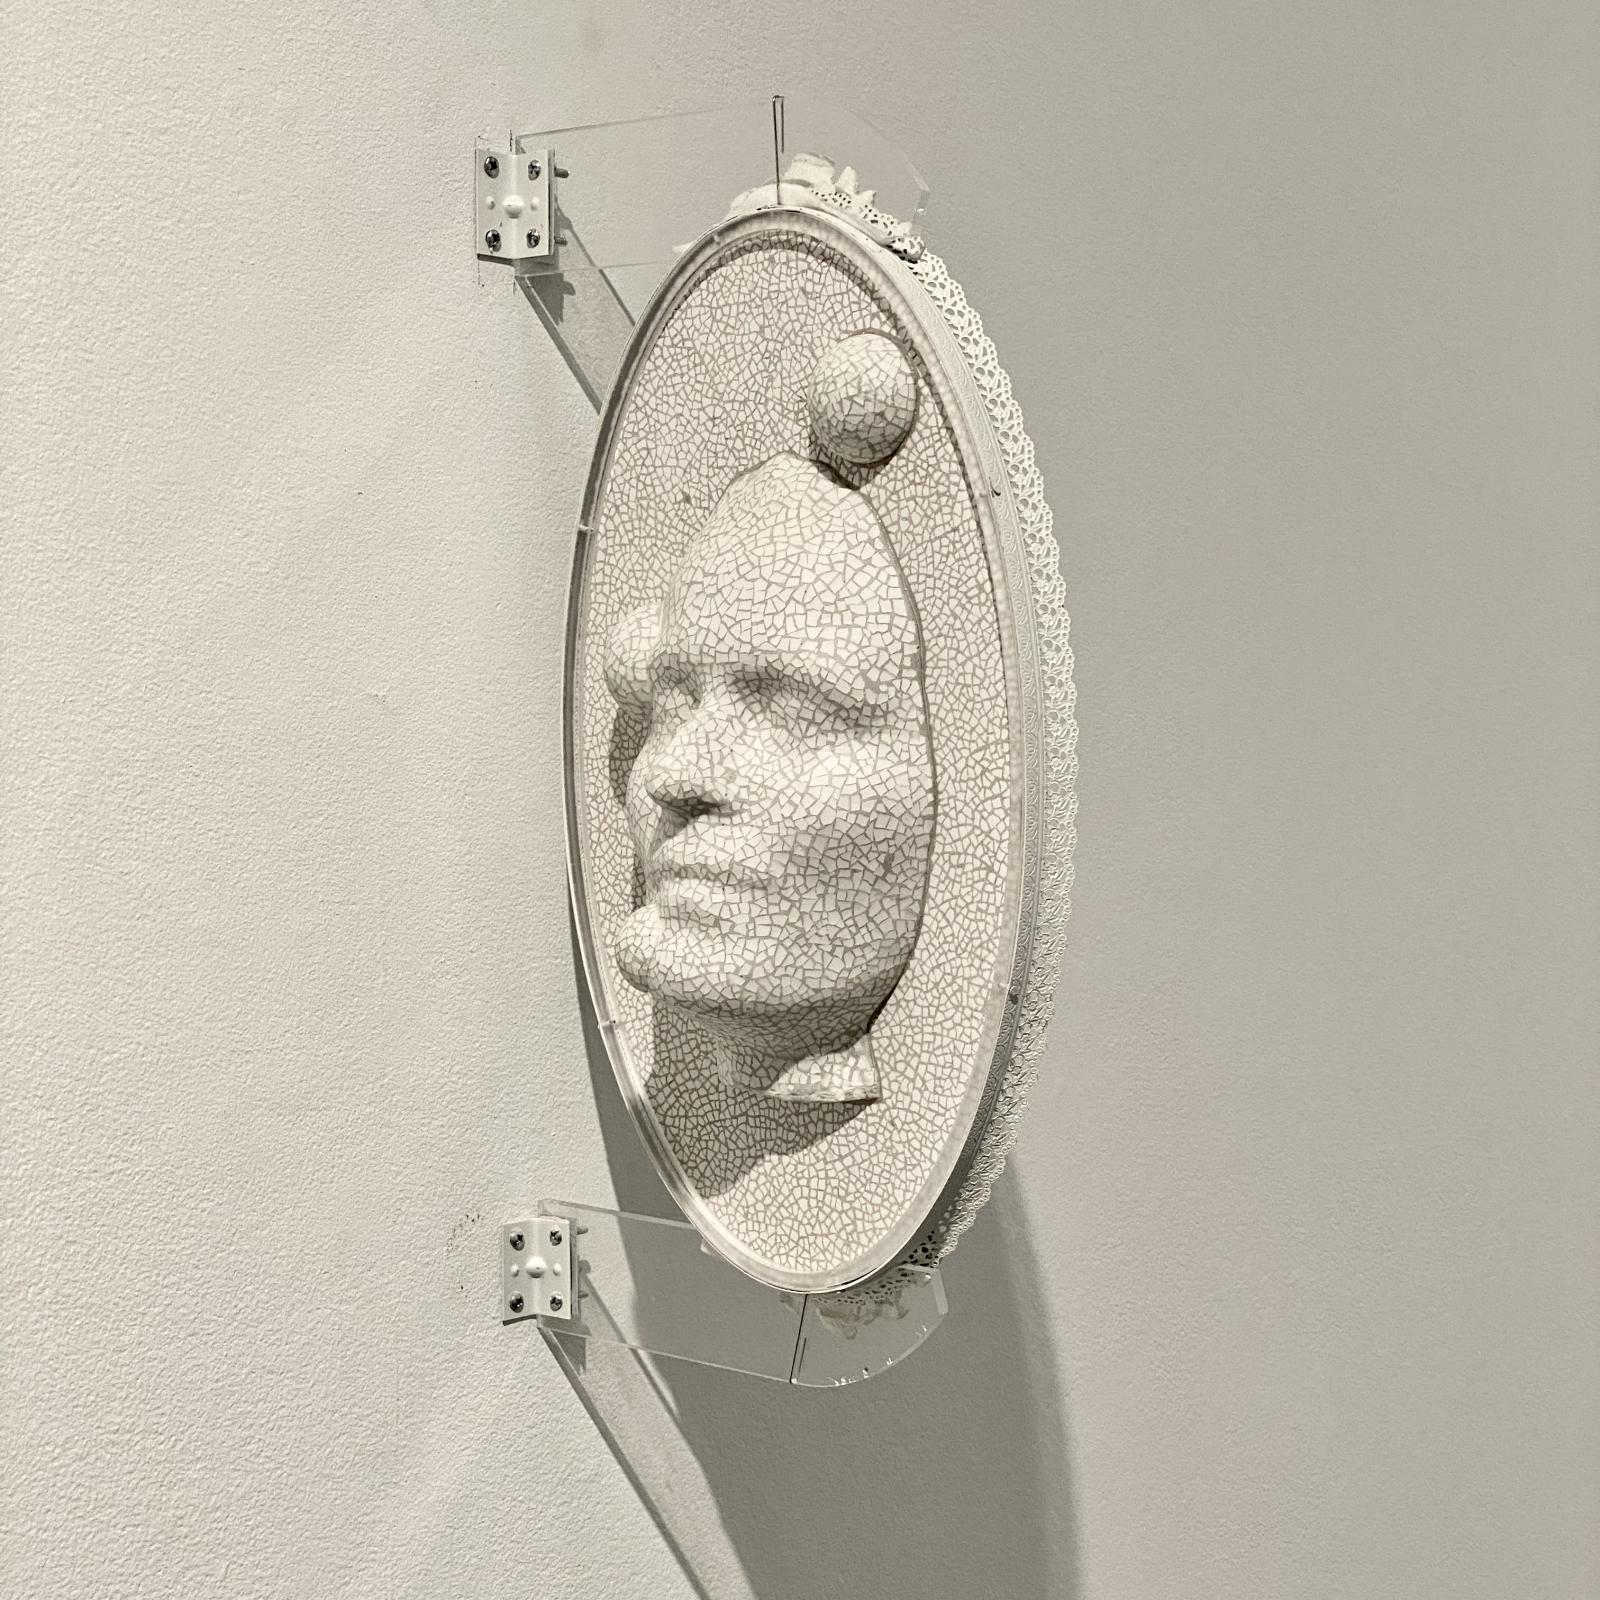 Self portrait in cameo format. Life sized from face scan, spheres from Chinese meditation balls. On antique mirror. Wall mounted with both sides visible. 